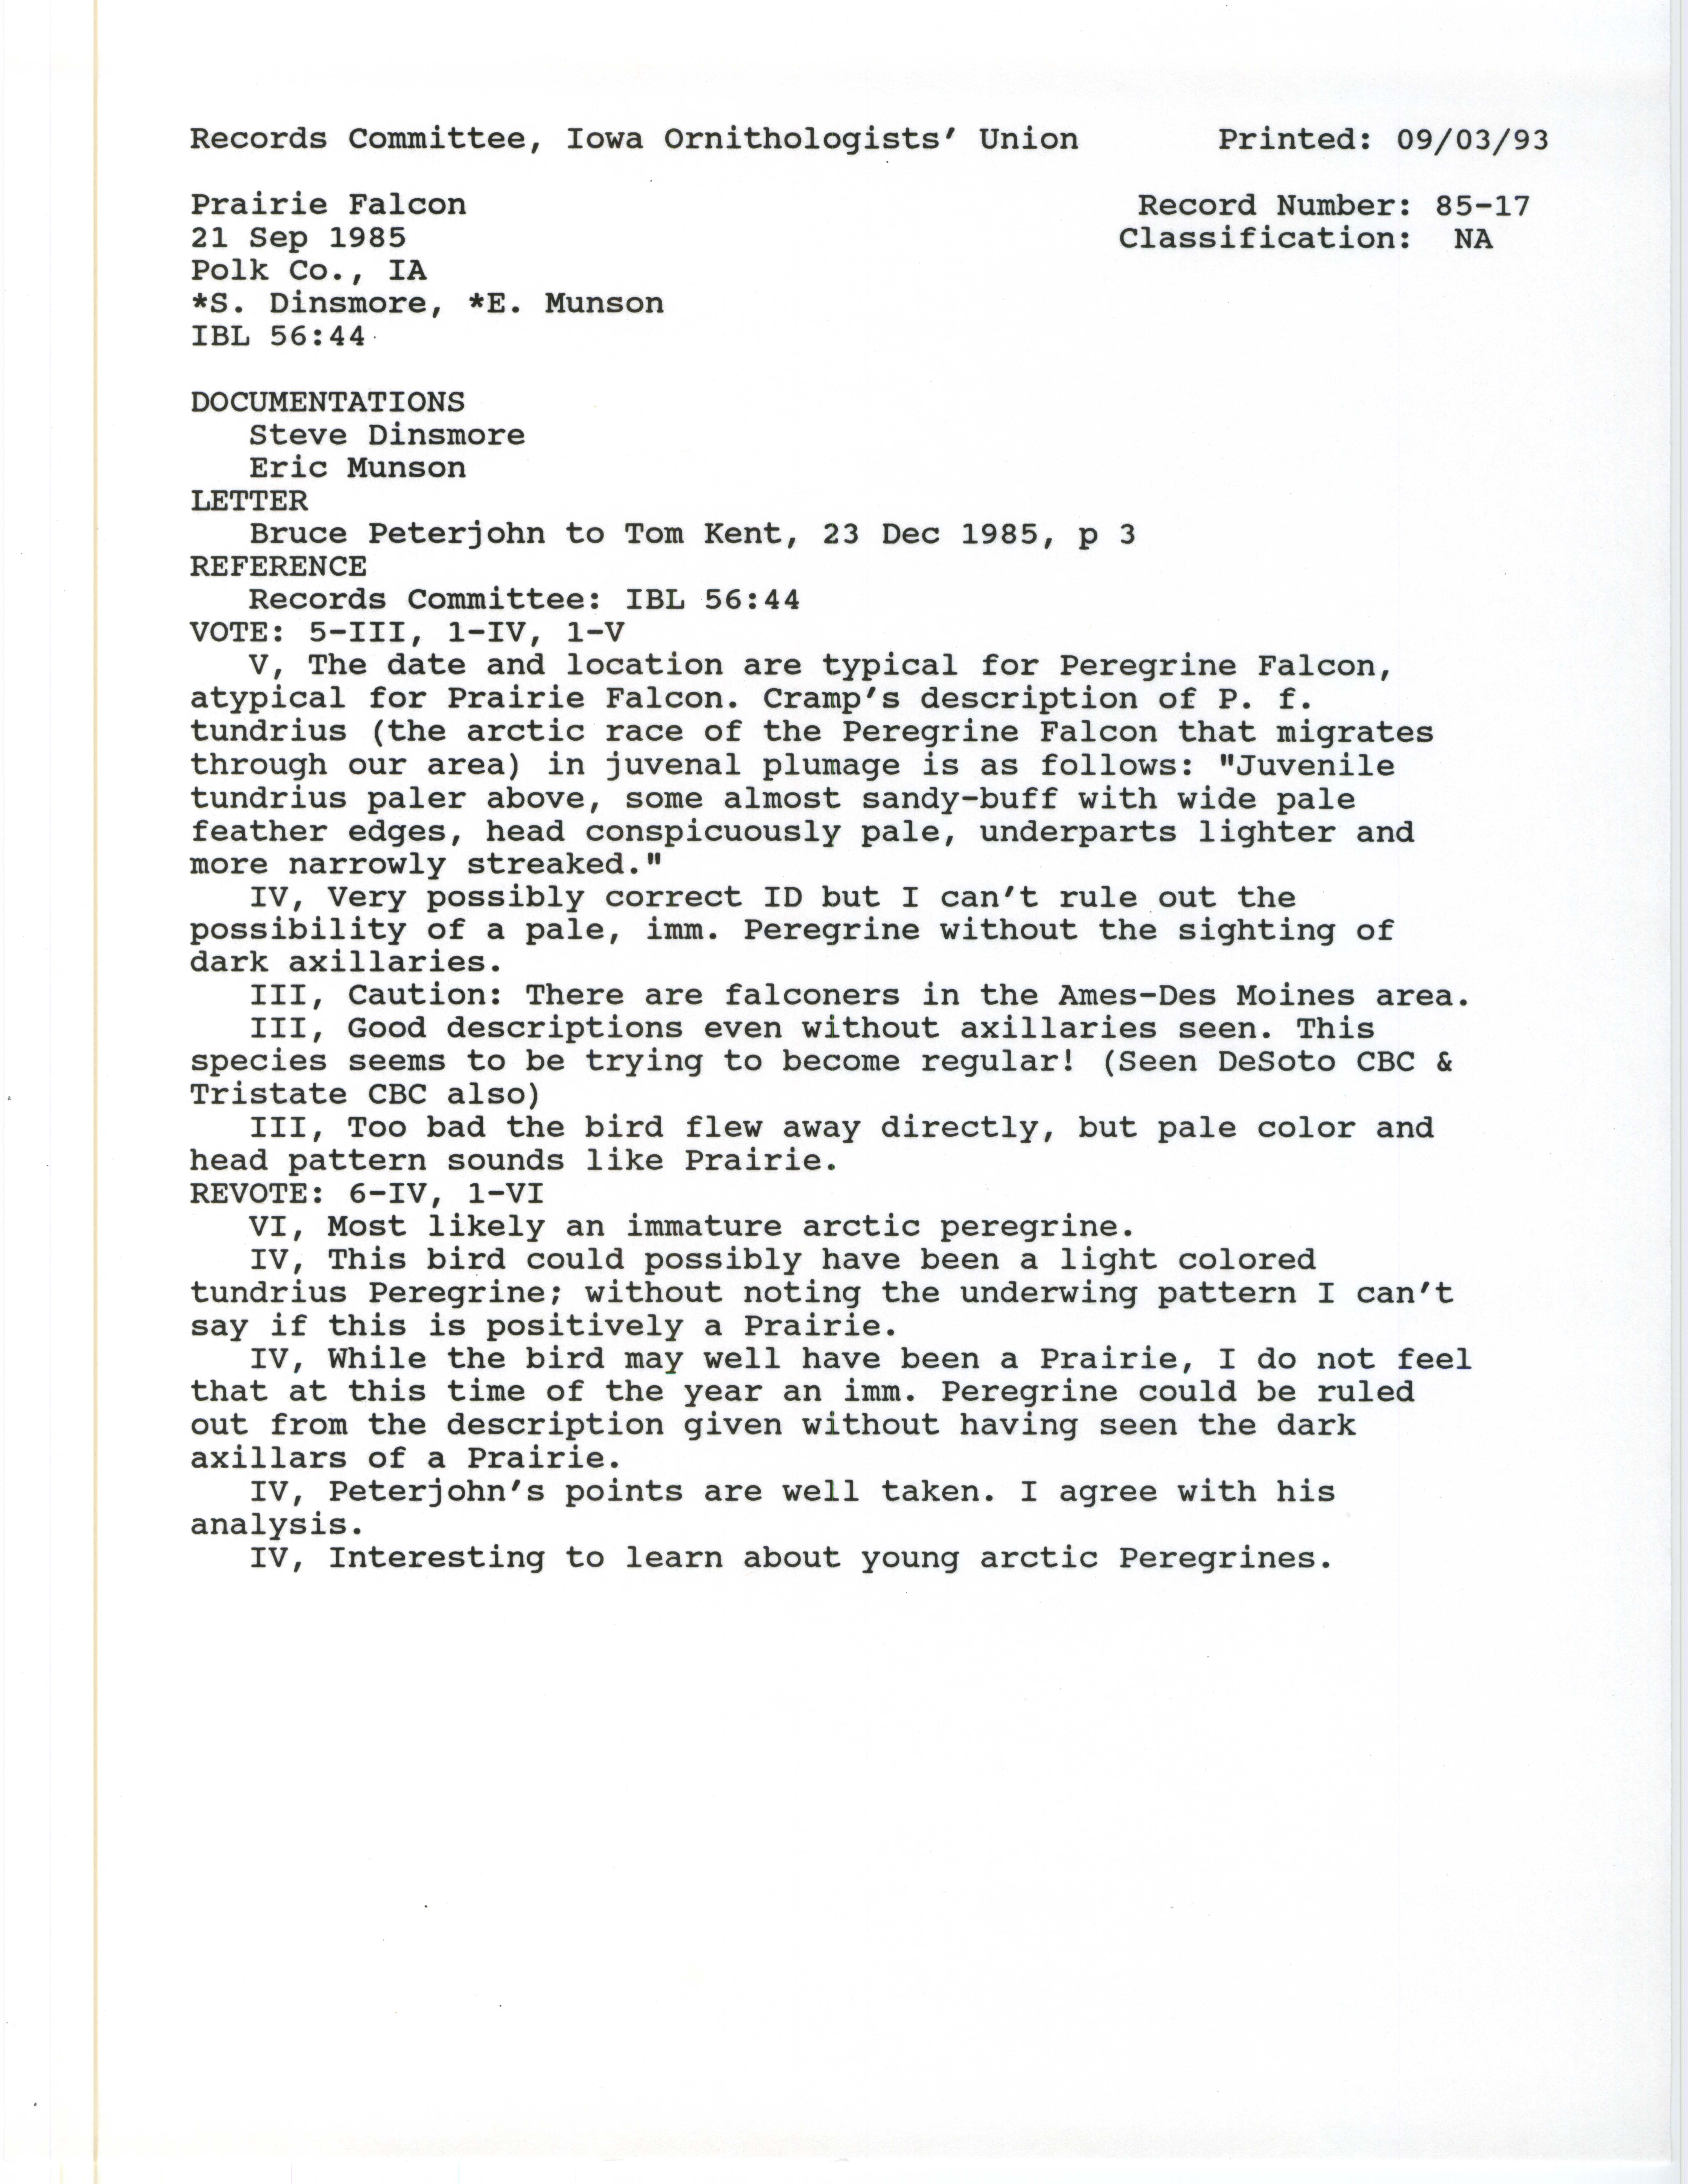 Records Committee review for rare bird sighting of Prairie Falcon north of Alleman, 1985